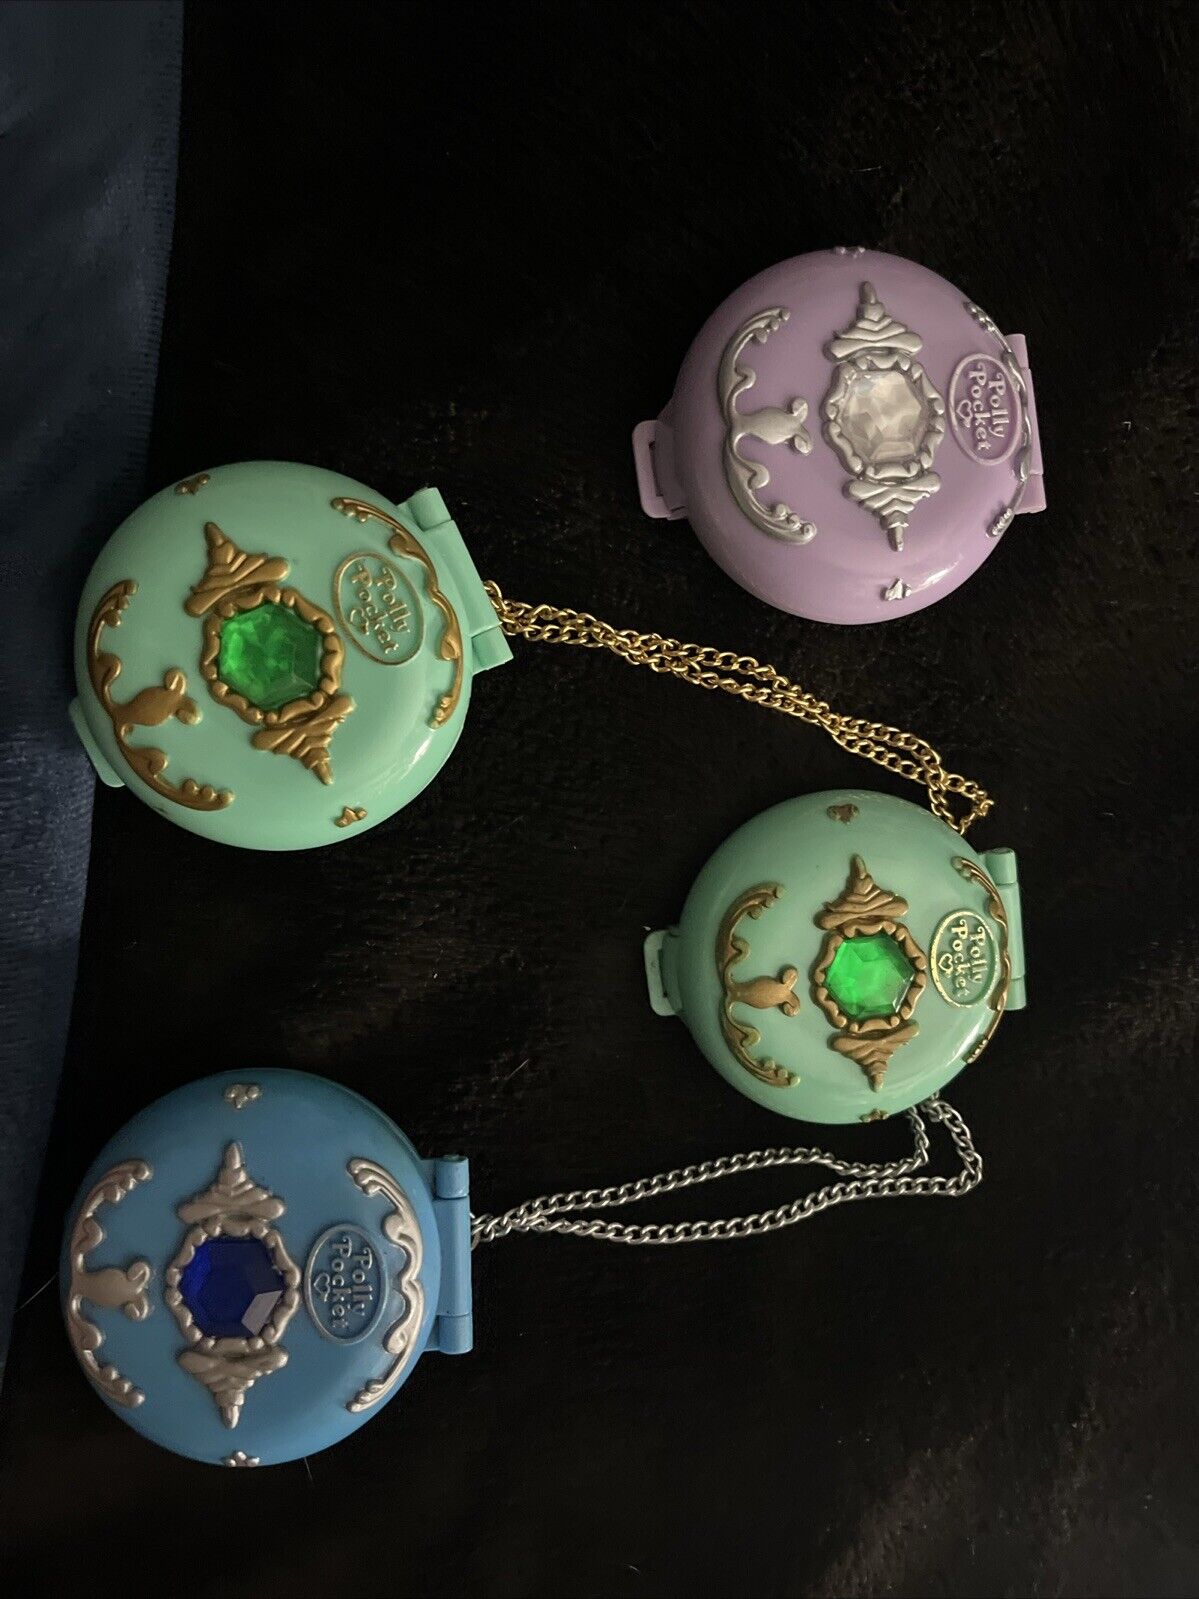 Polly Pocket Princess Jeweled Chain Compacts 1992 Vintage Bluebird